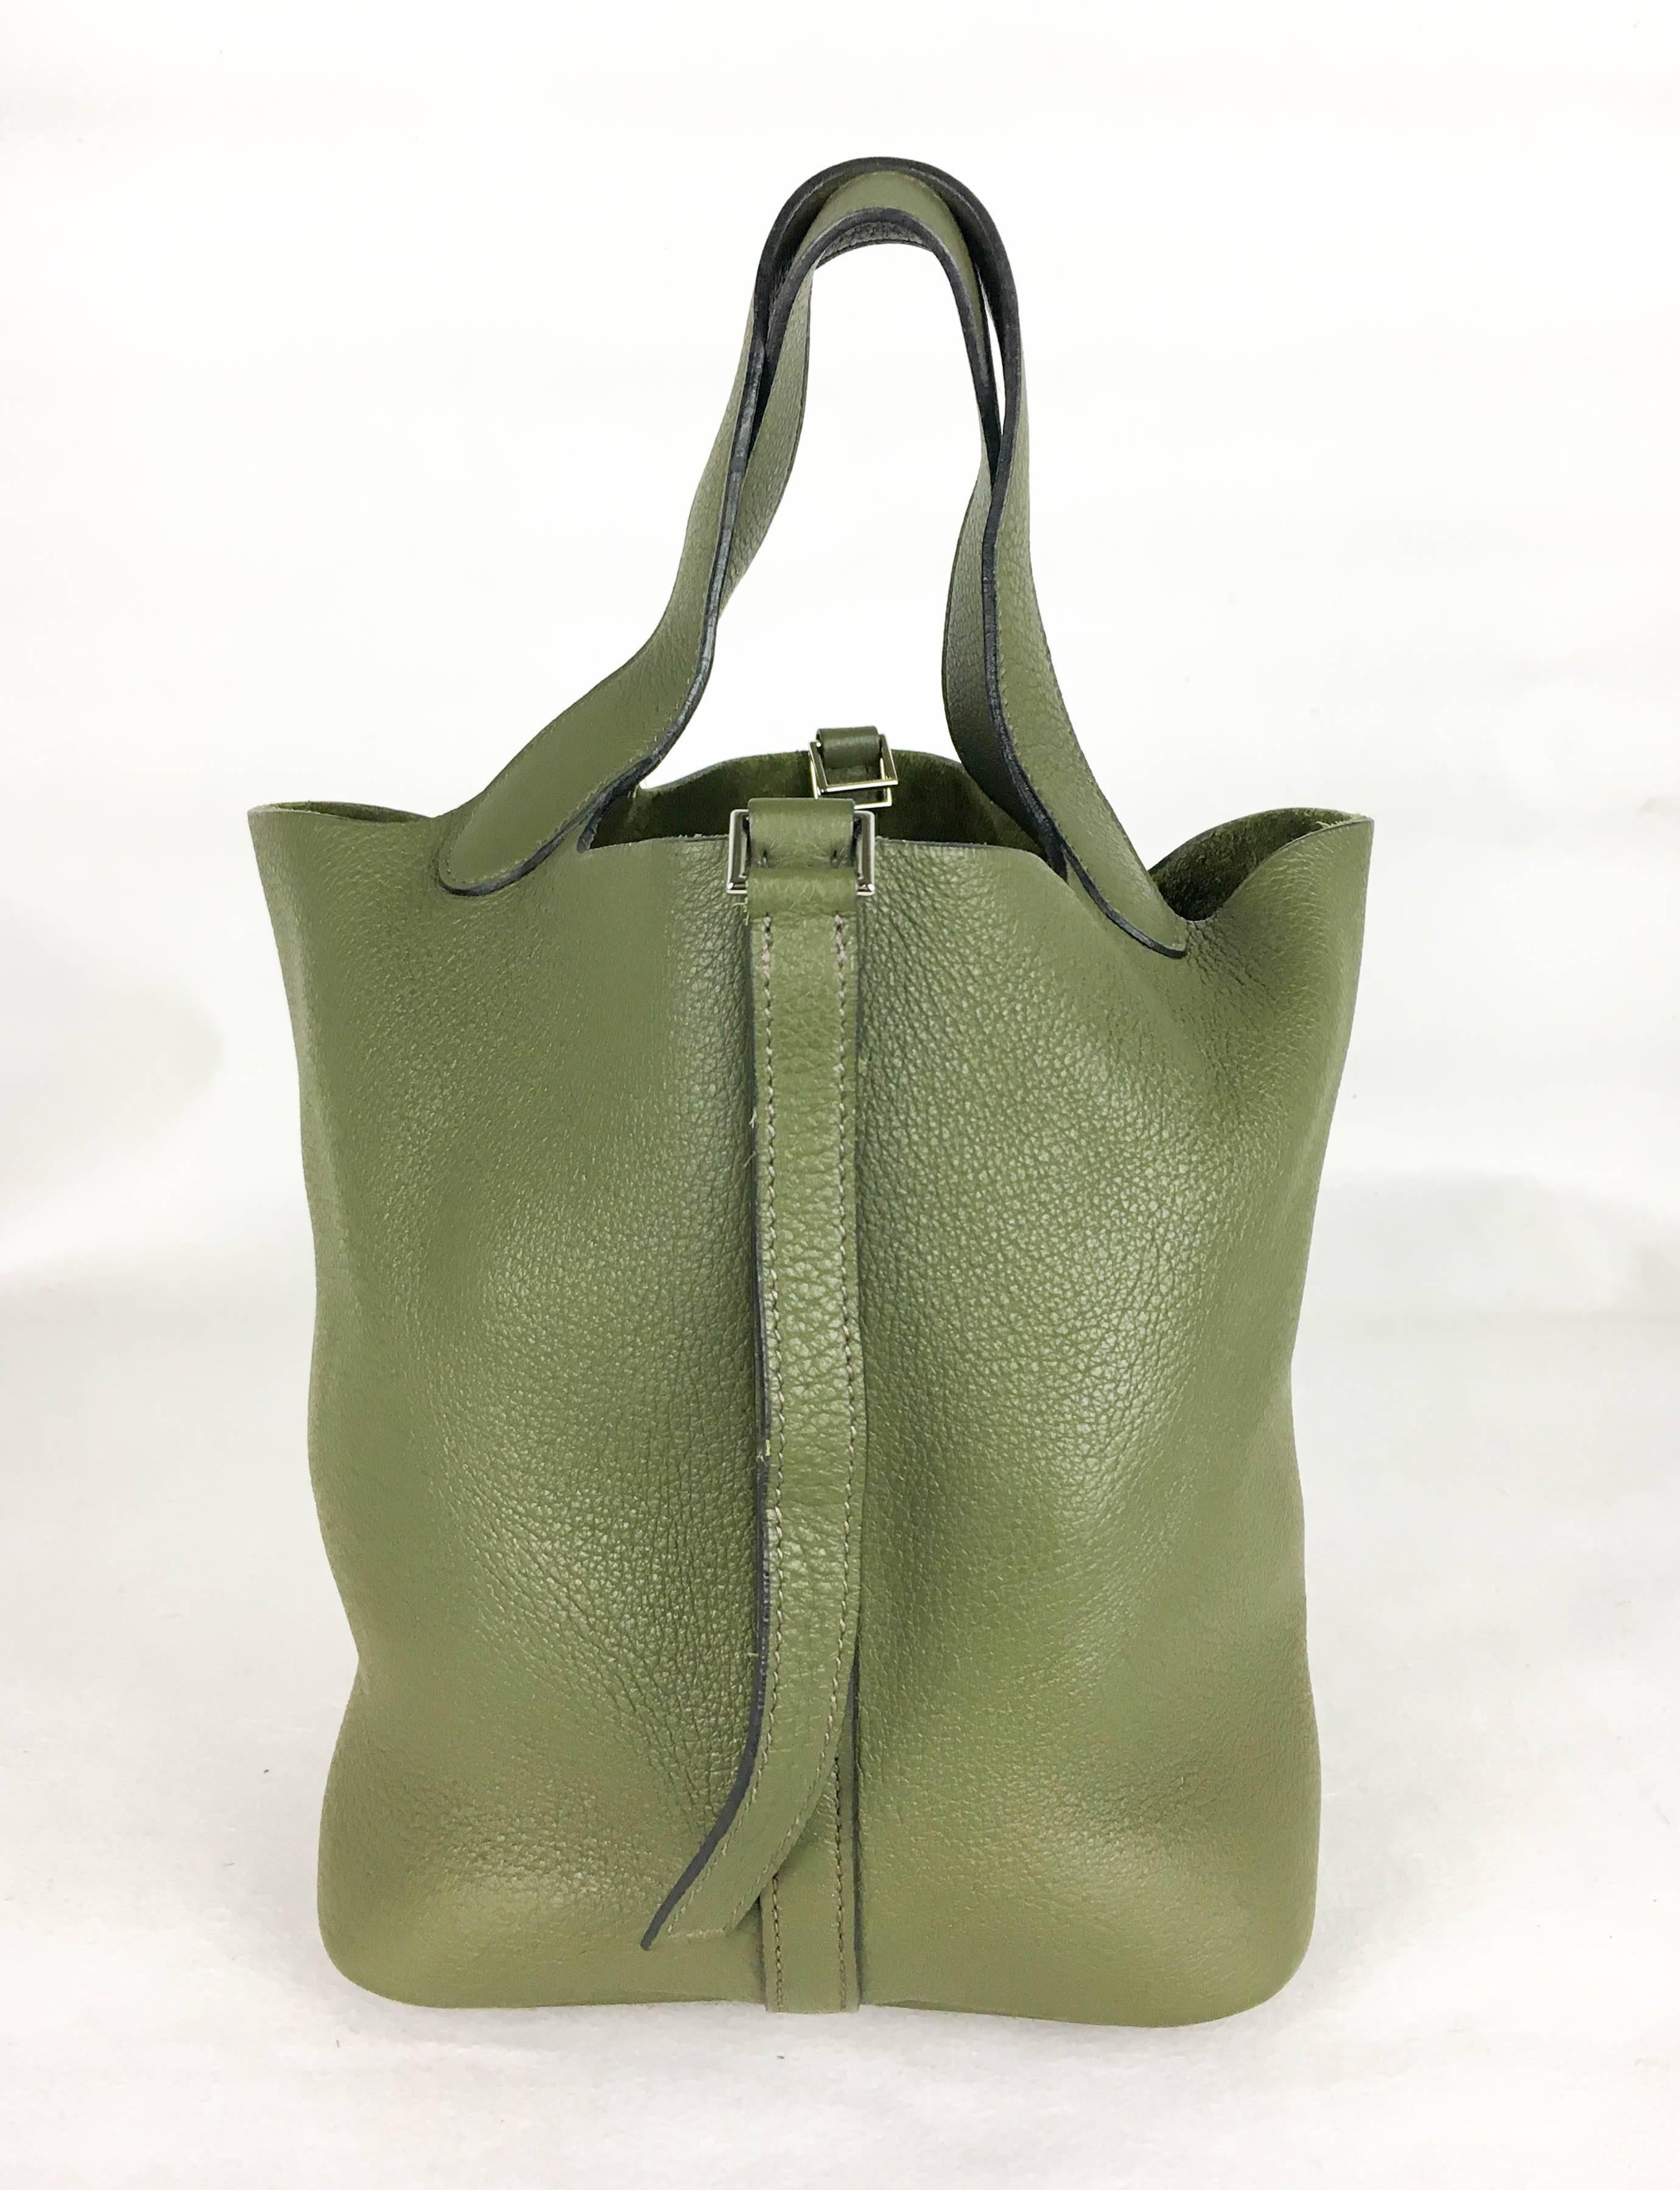 2007 Hermes Picotin 22 Handbag in Olive Green Clemence Leather In Excellent Condition For Sale In London, Chelsea